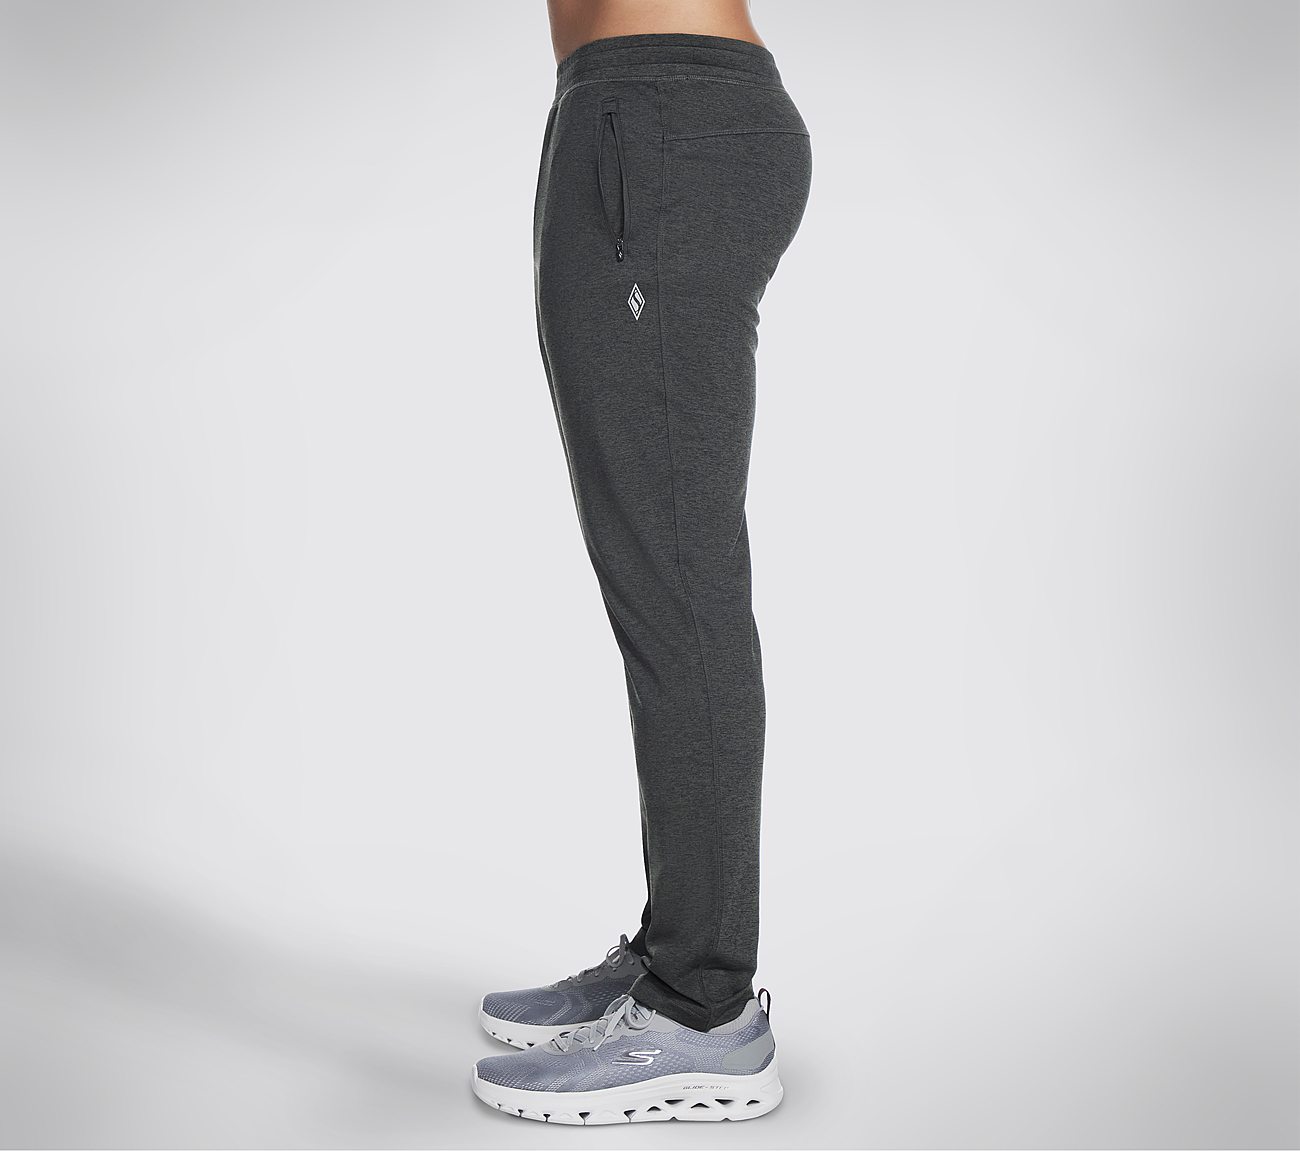 SKECH-KNITS ULTRA GO TAPERED, CCHARCOAL Apparel Bottom View